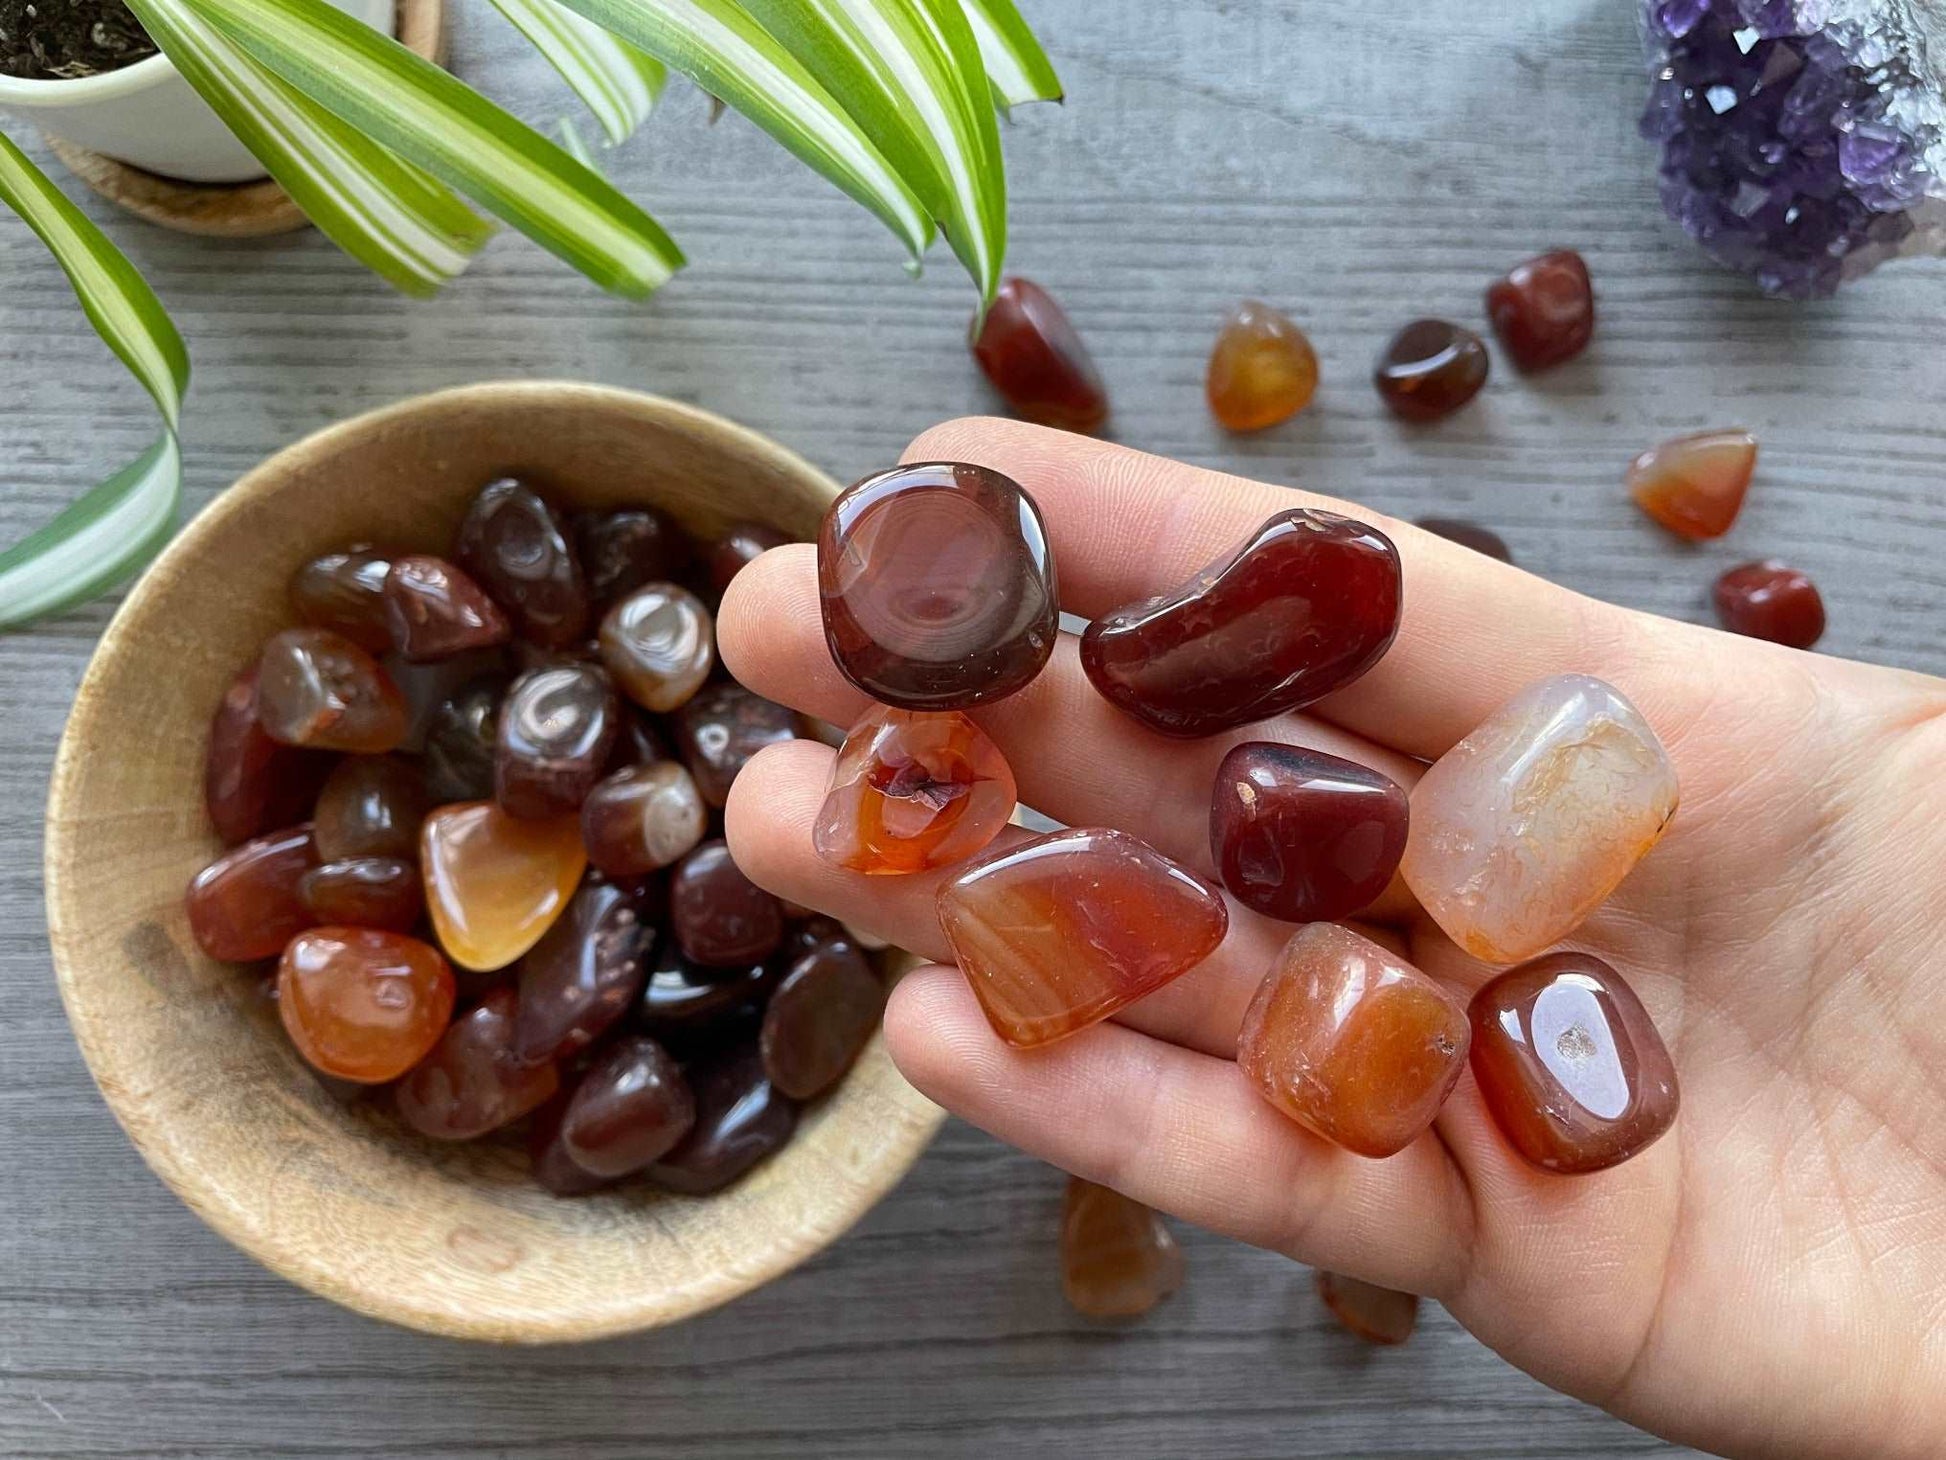 Pictured are various carnelian tumbled stones.